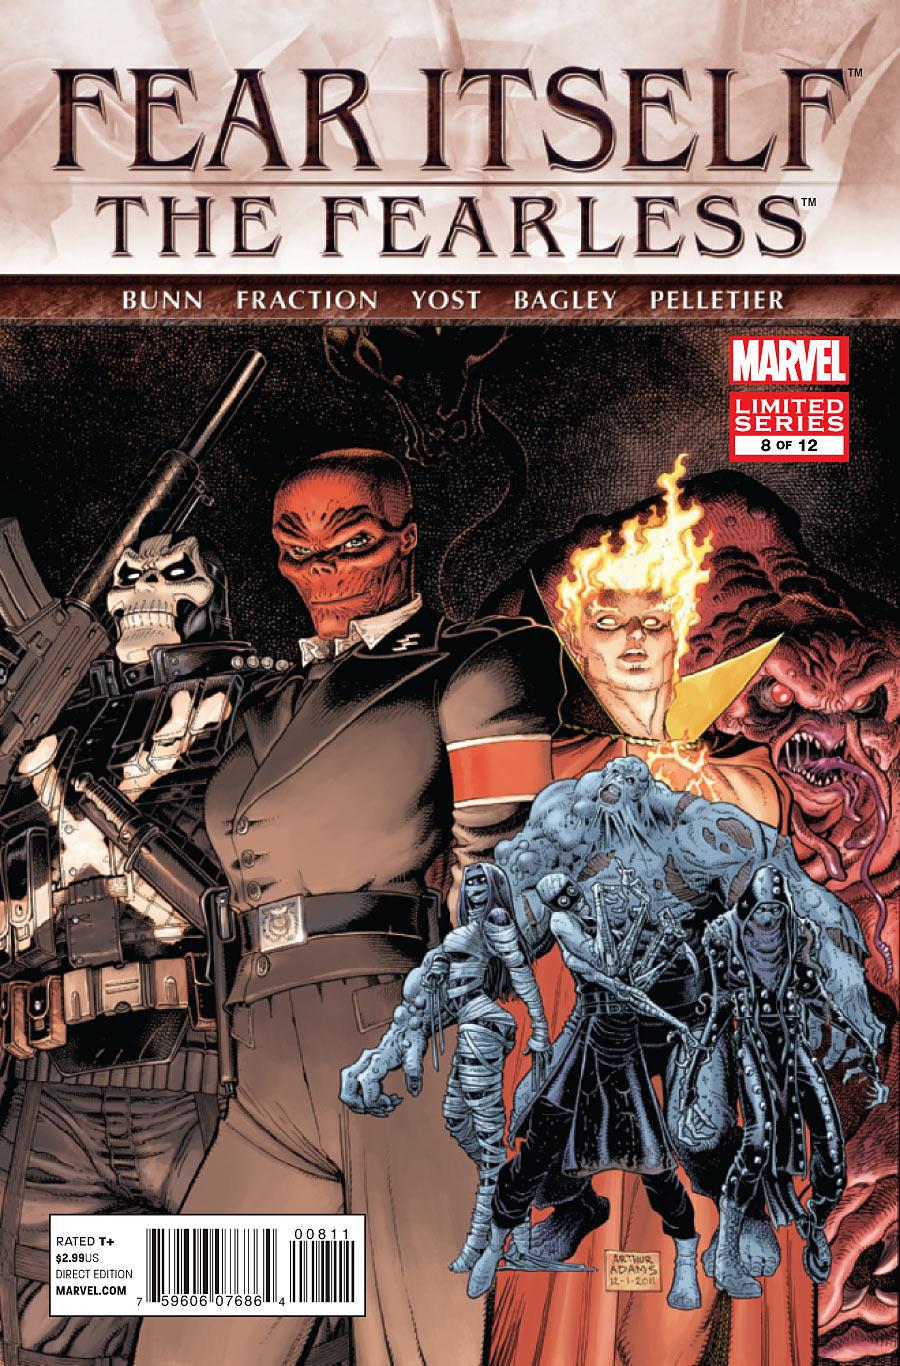 Fear Itself: The Fearless Vol. 1 #8